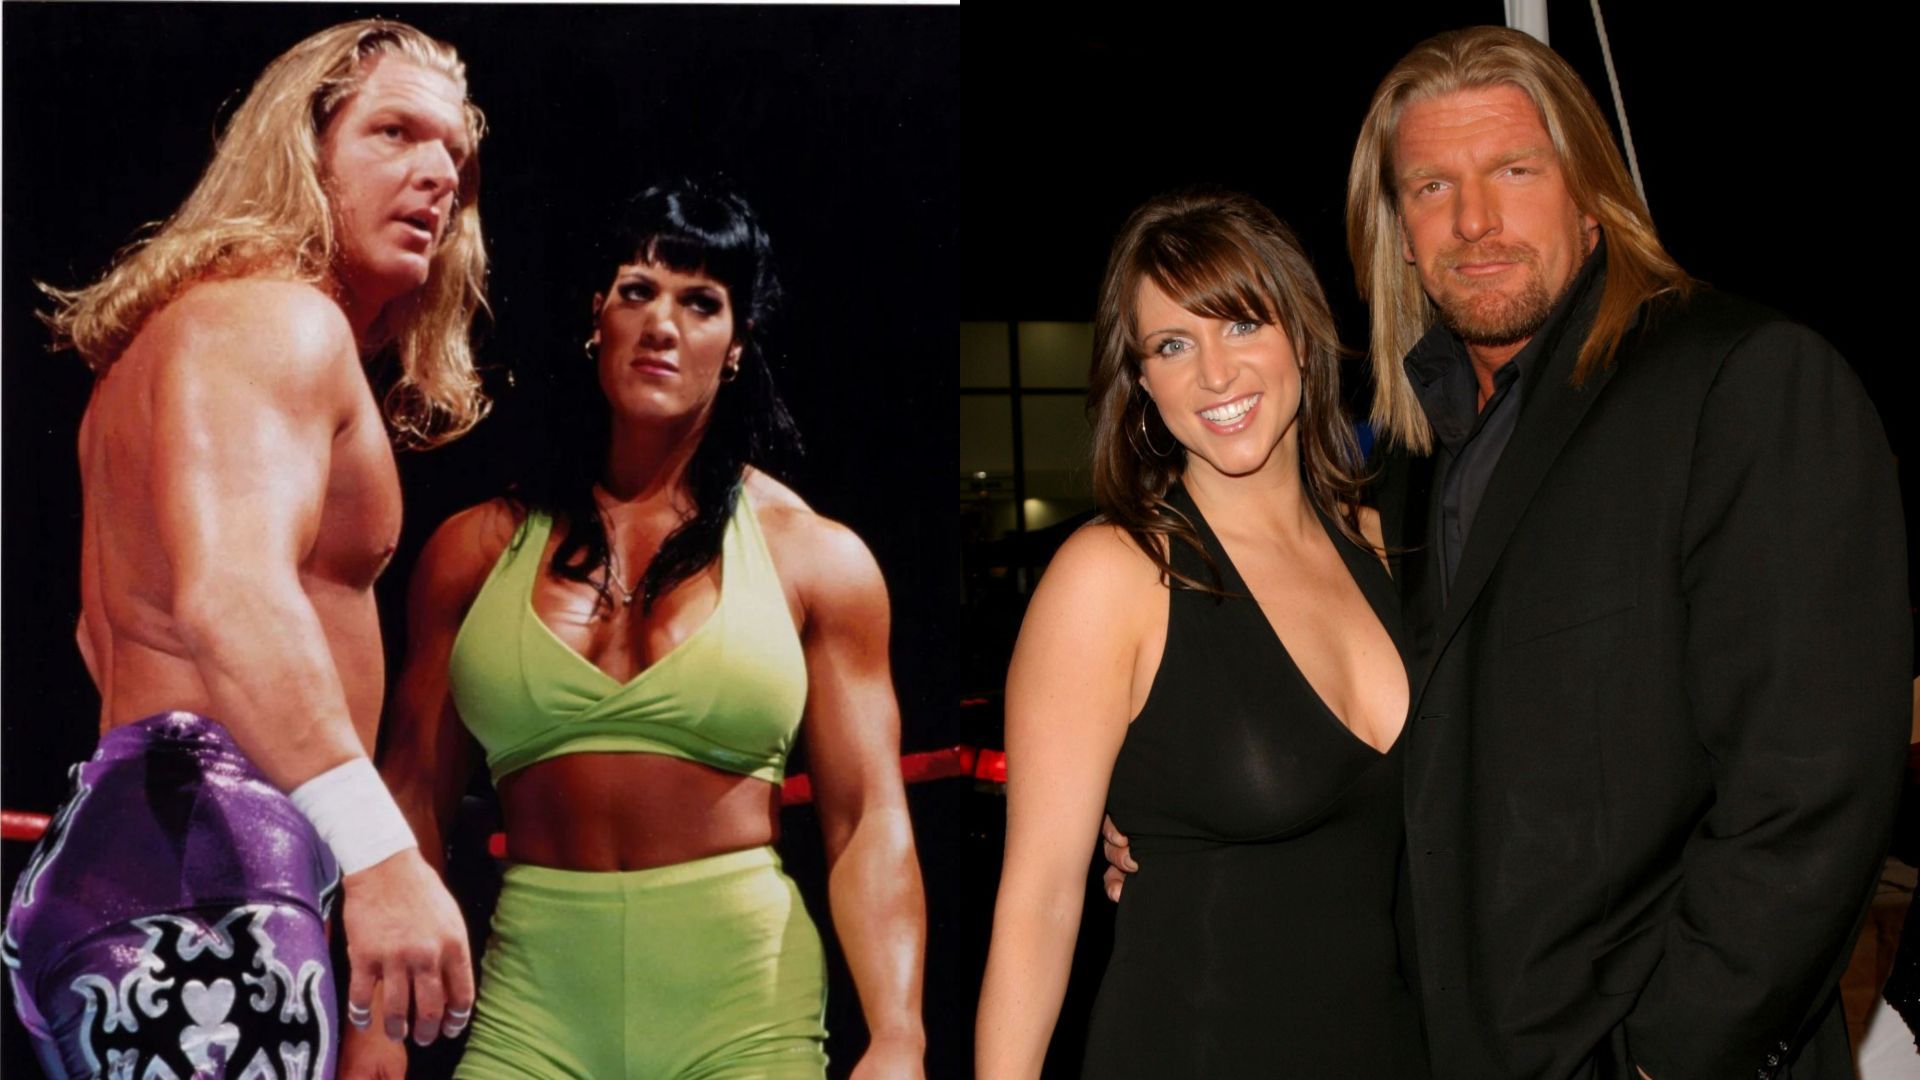 Chyna accused Triple H of cheating on her with Stephanie McMahon